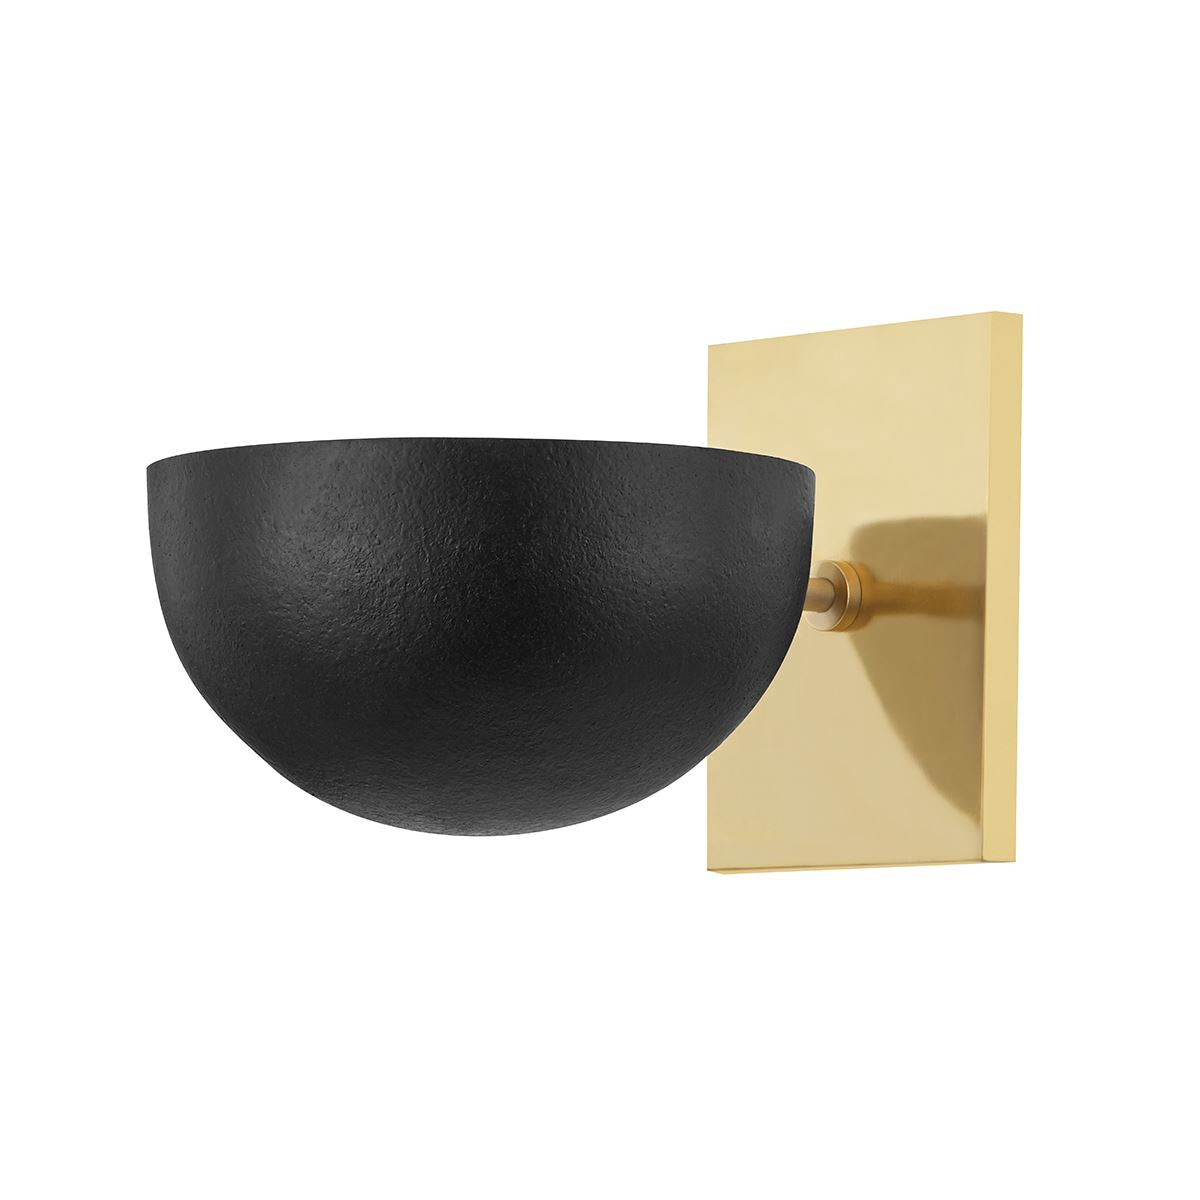 Chance Sconce Black Plaster. Right angle view.